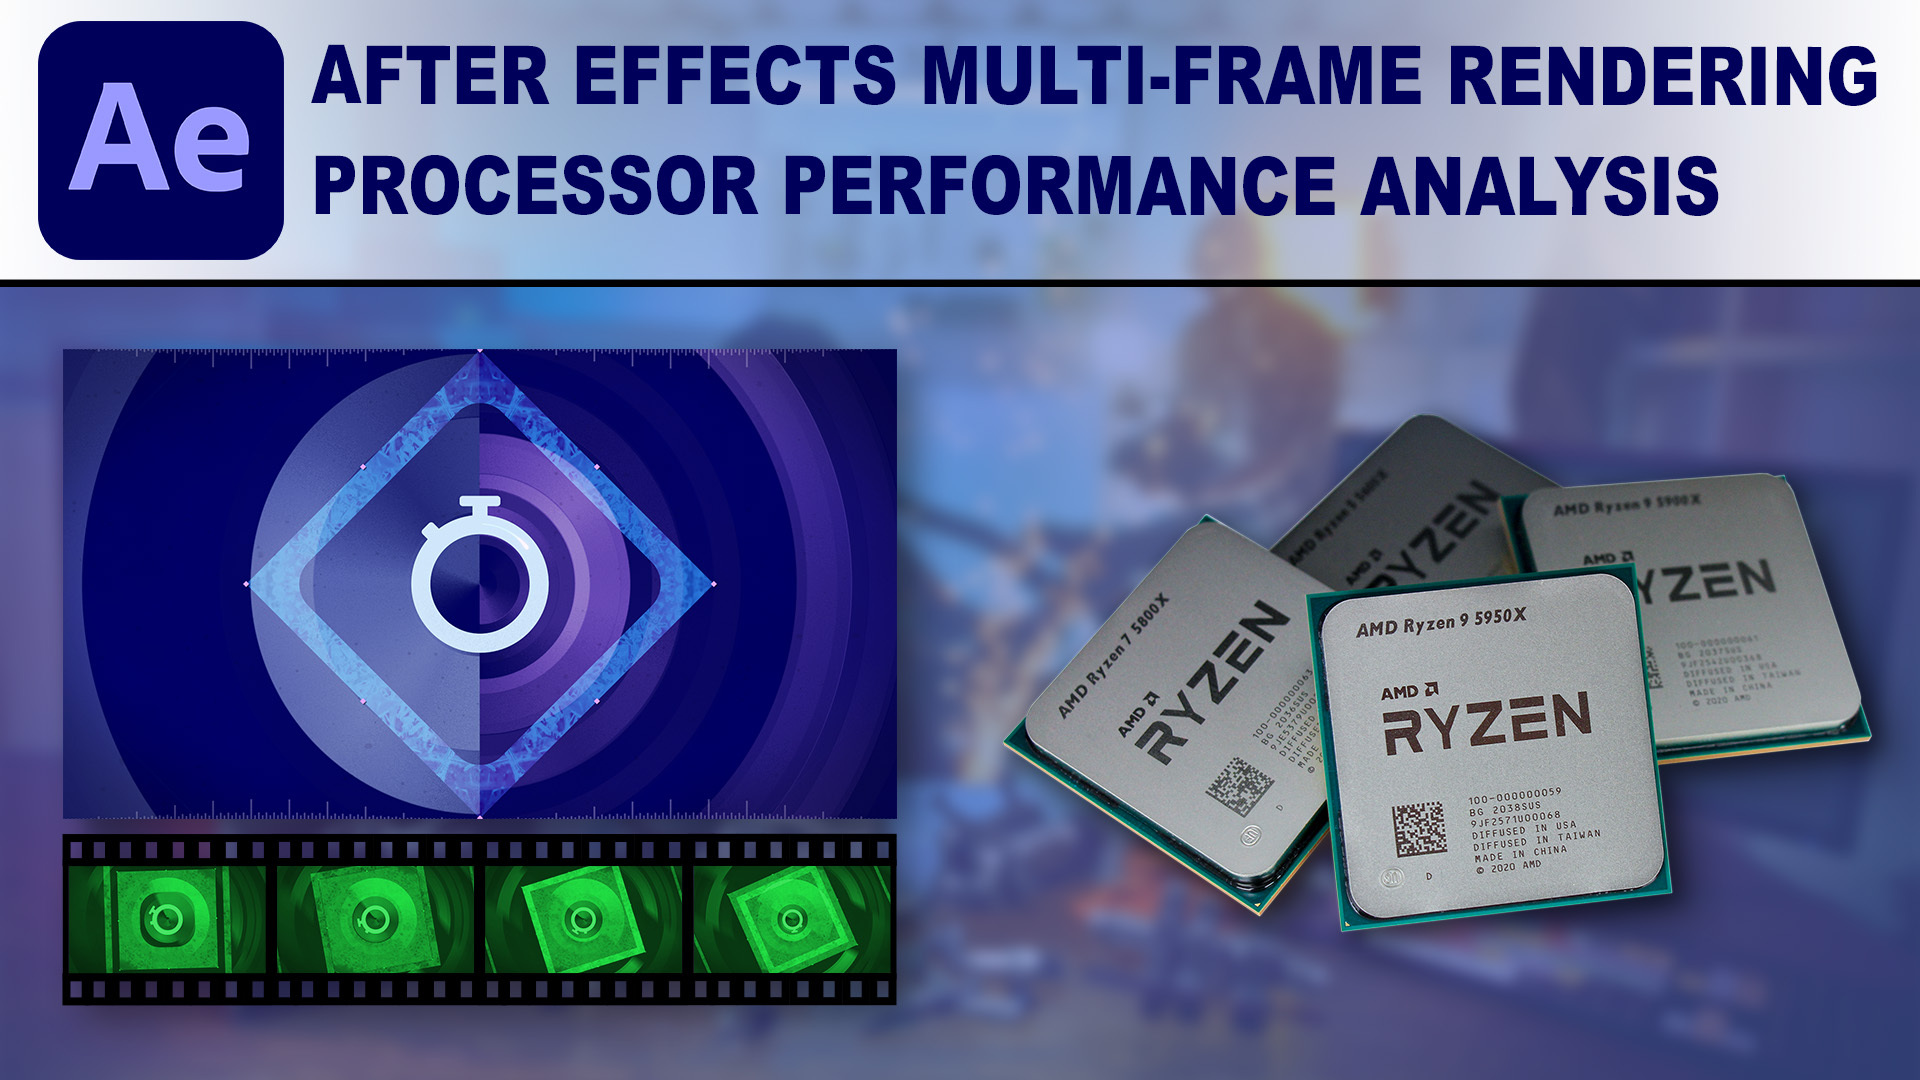 After Effects Multi-Frame Rendering CPU Benchmark Performance